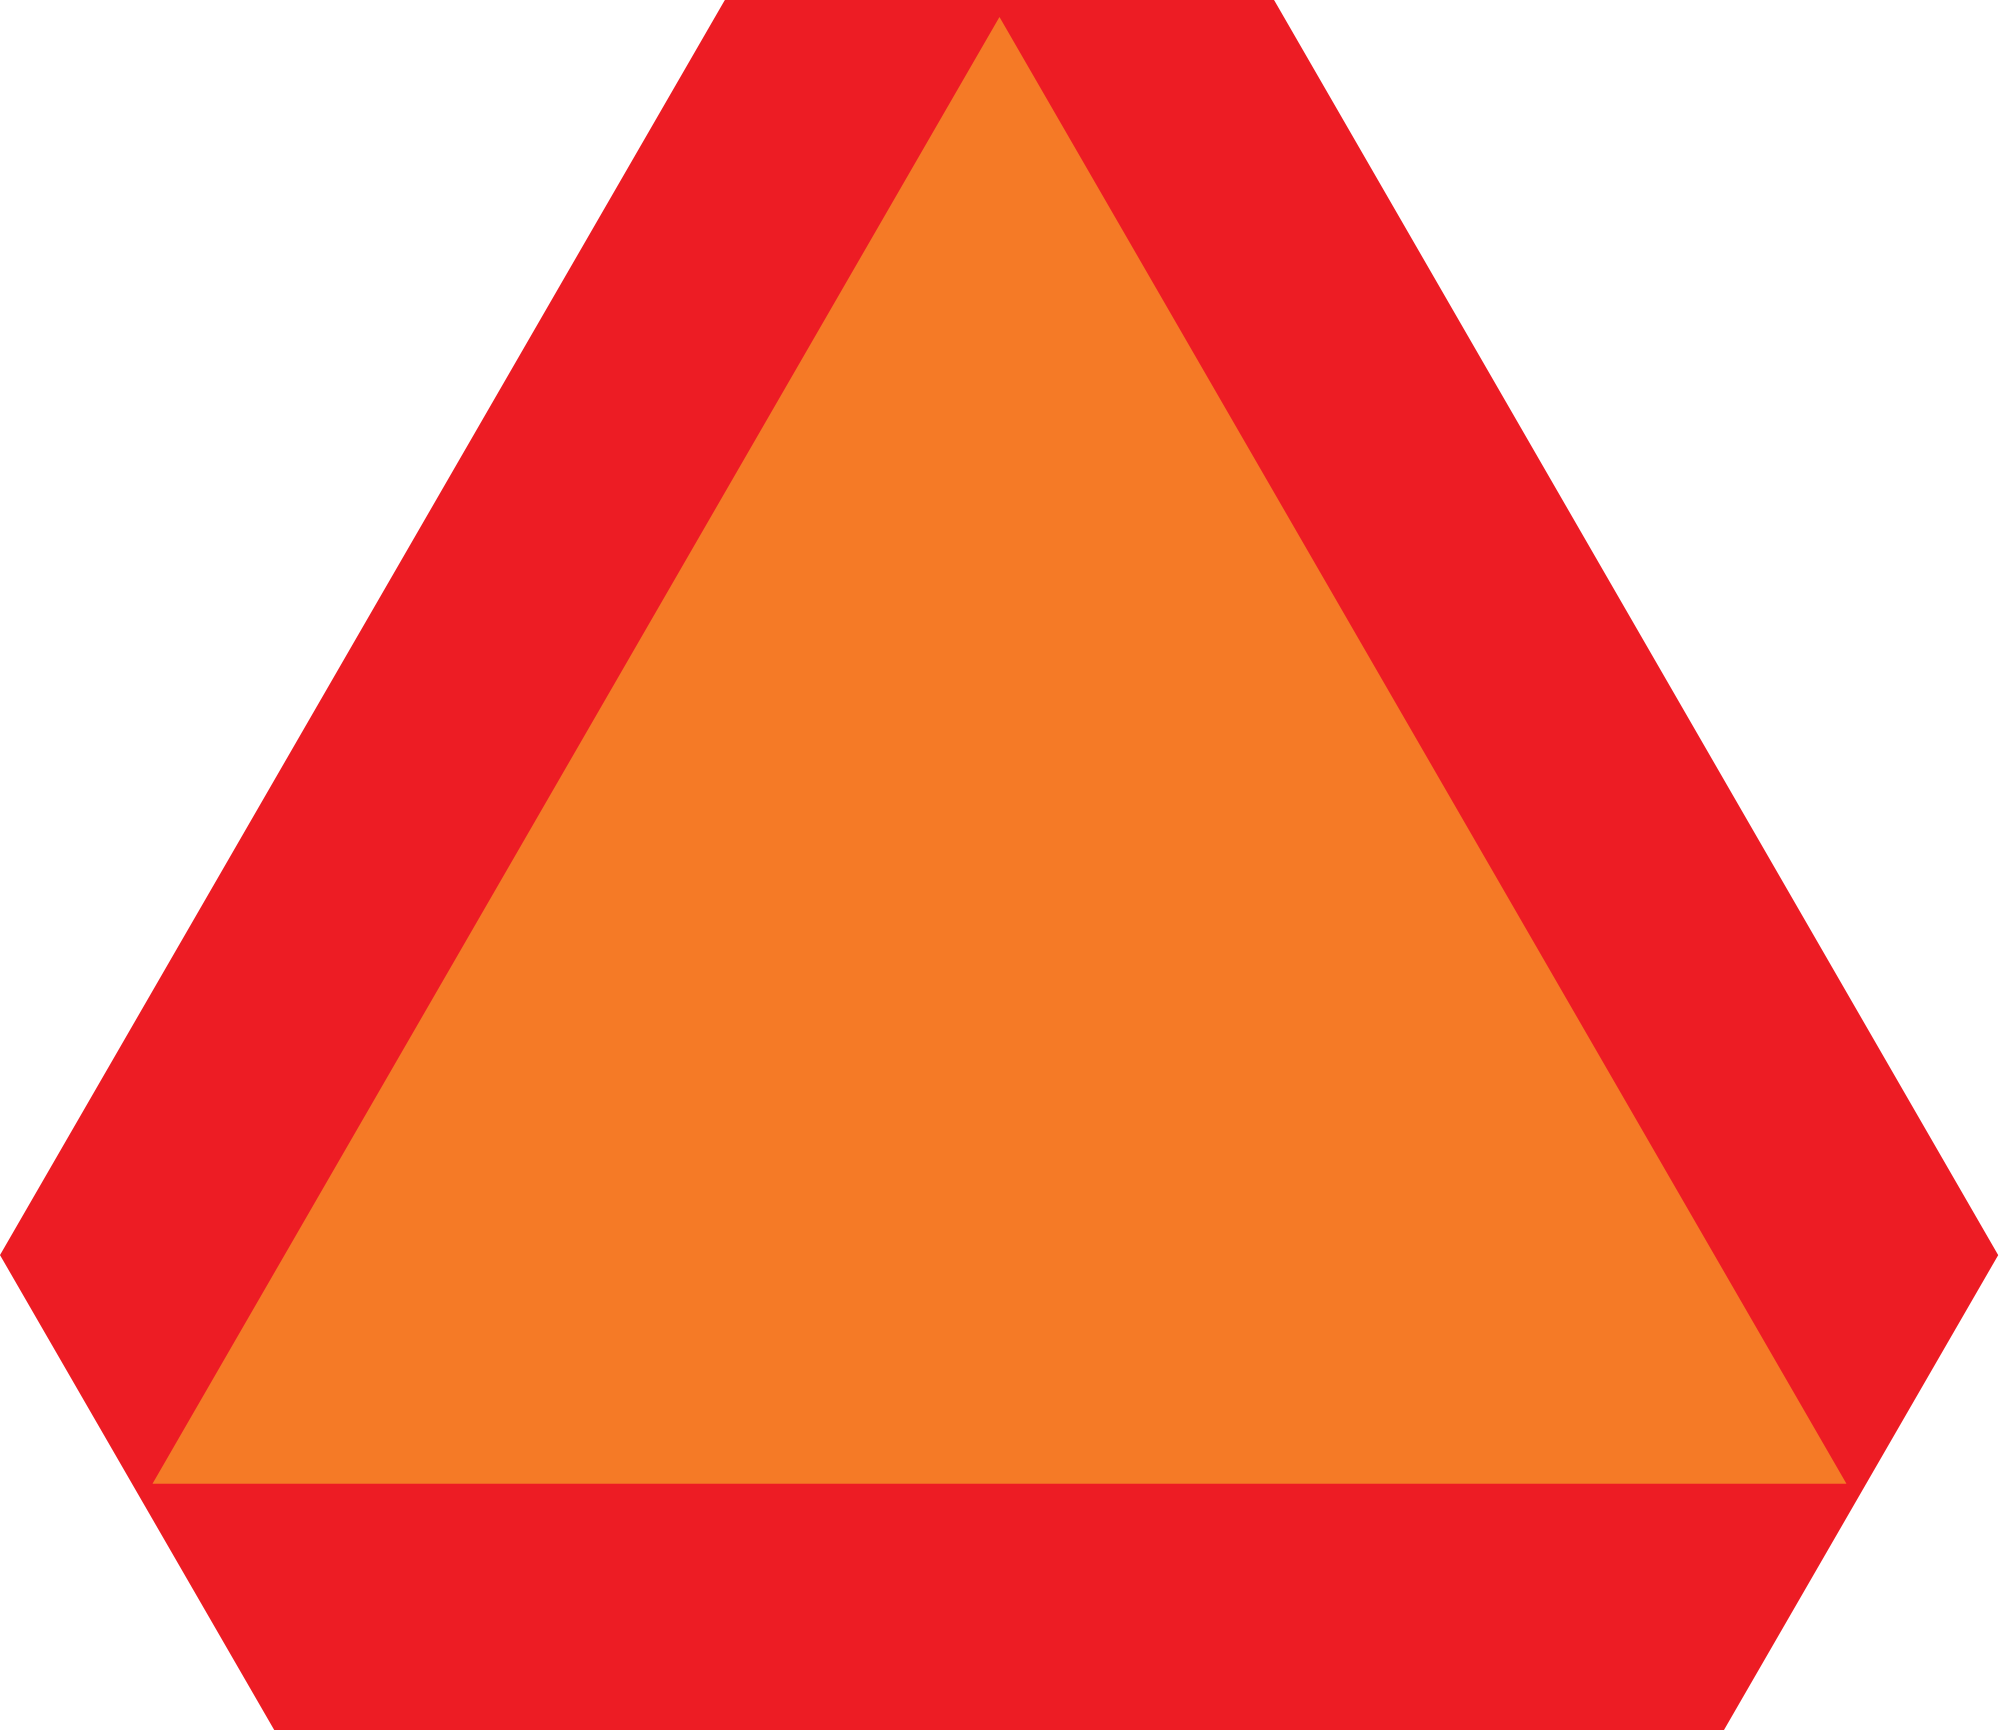 Slow Moving Vehicle - Red And Orange Triangle Road Sign (2000x1733)